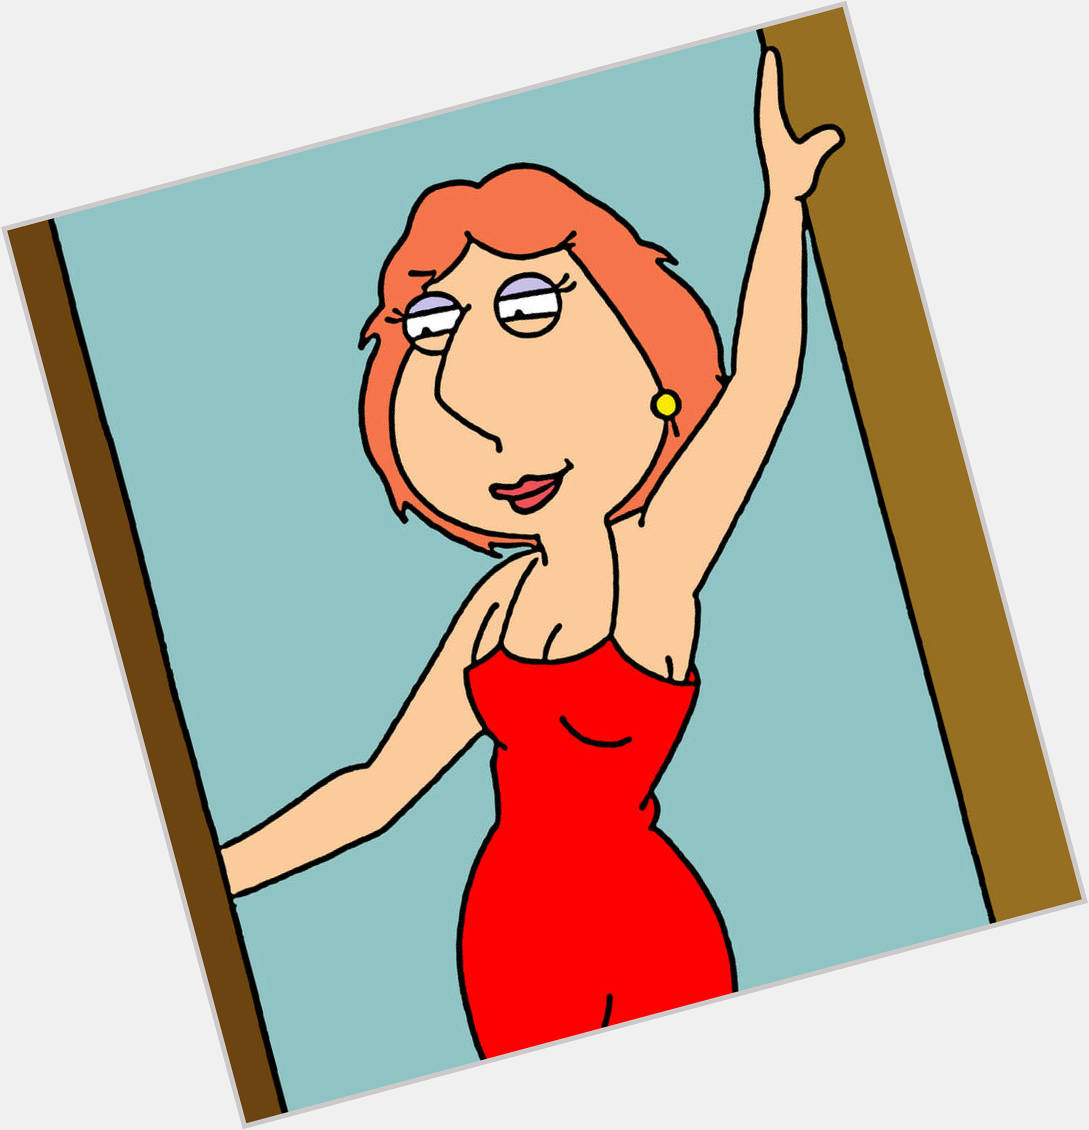 Lois Griffin Slim body,  red hair & hairstyles